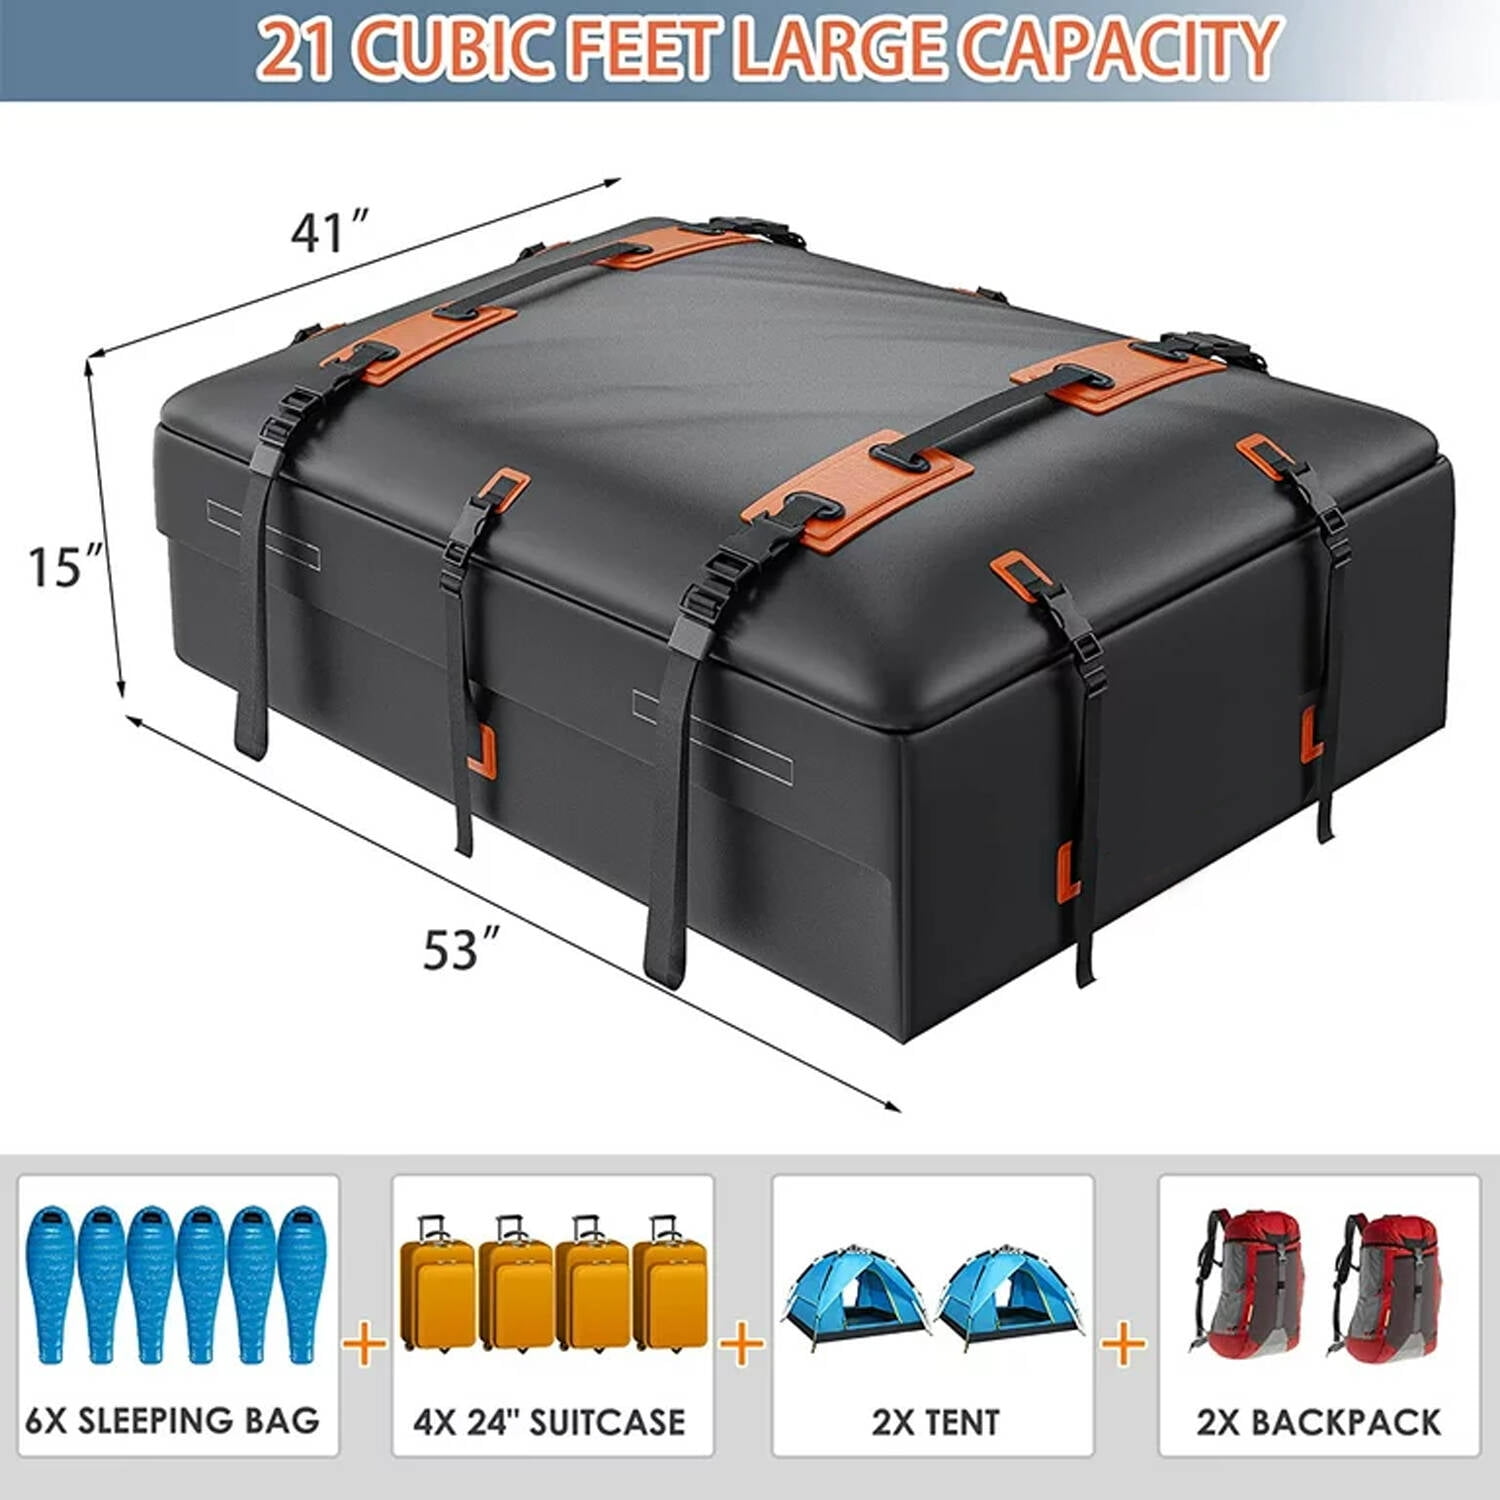 ADNOOM Car Roof Bag Rooftop Cargo Carrier, 21 Cubic feet